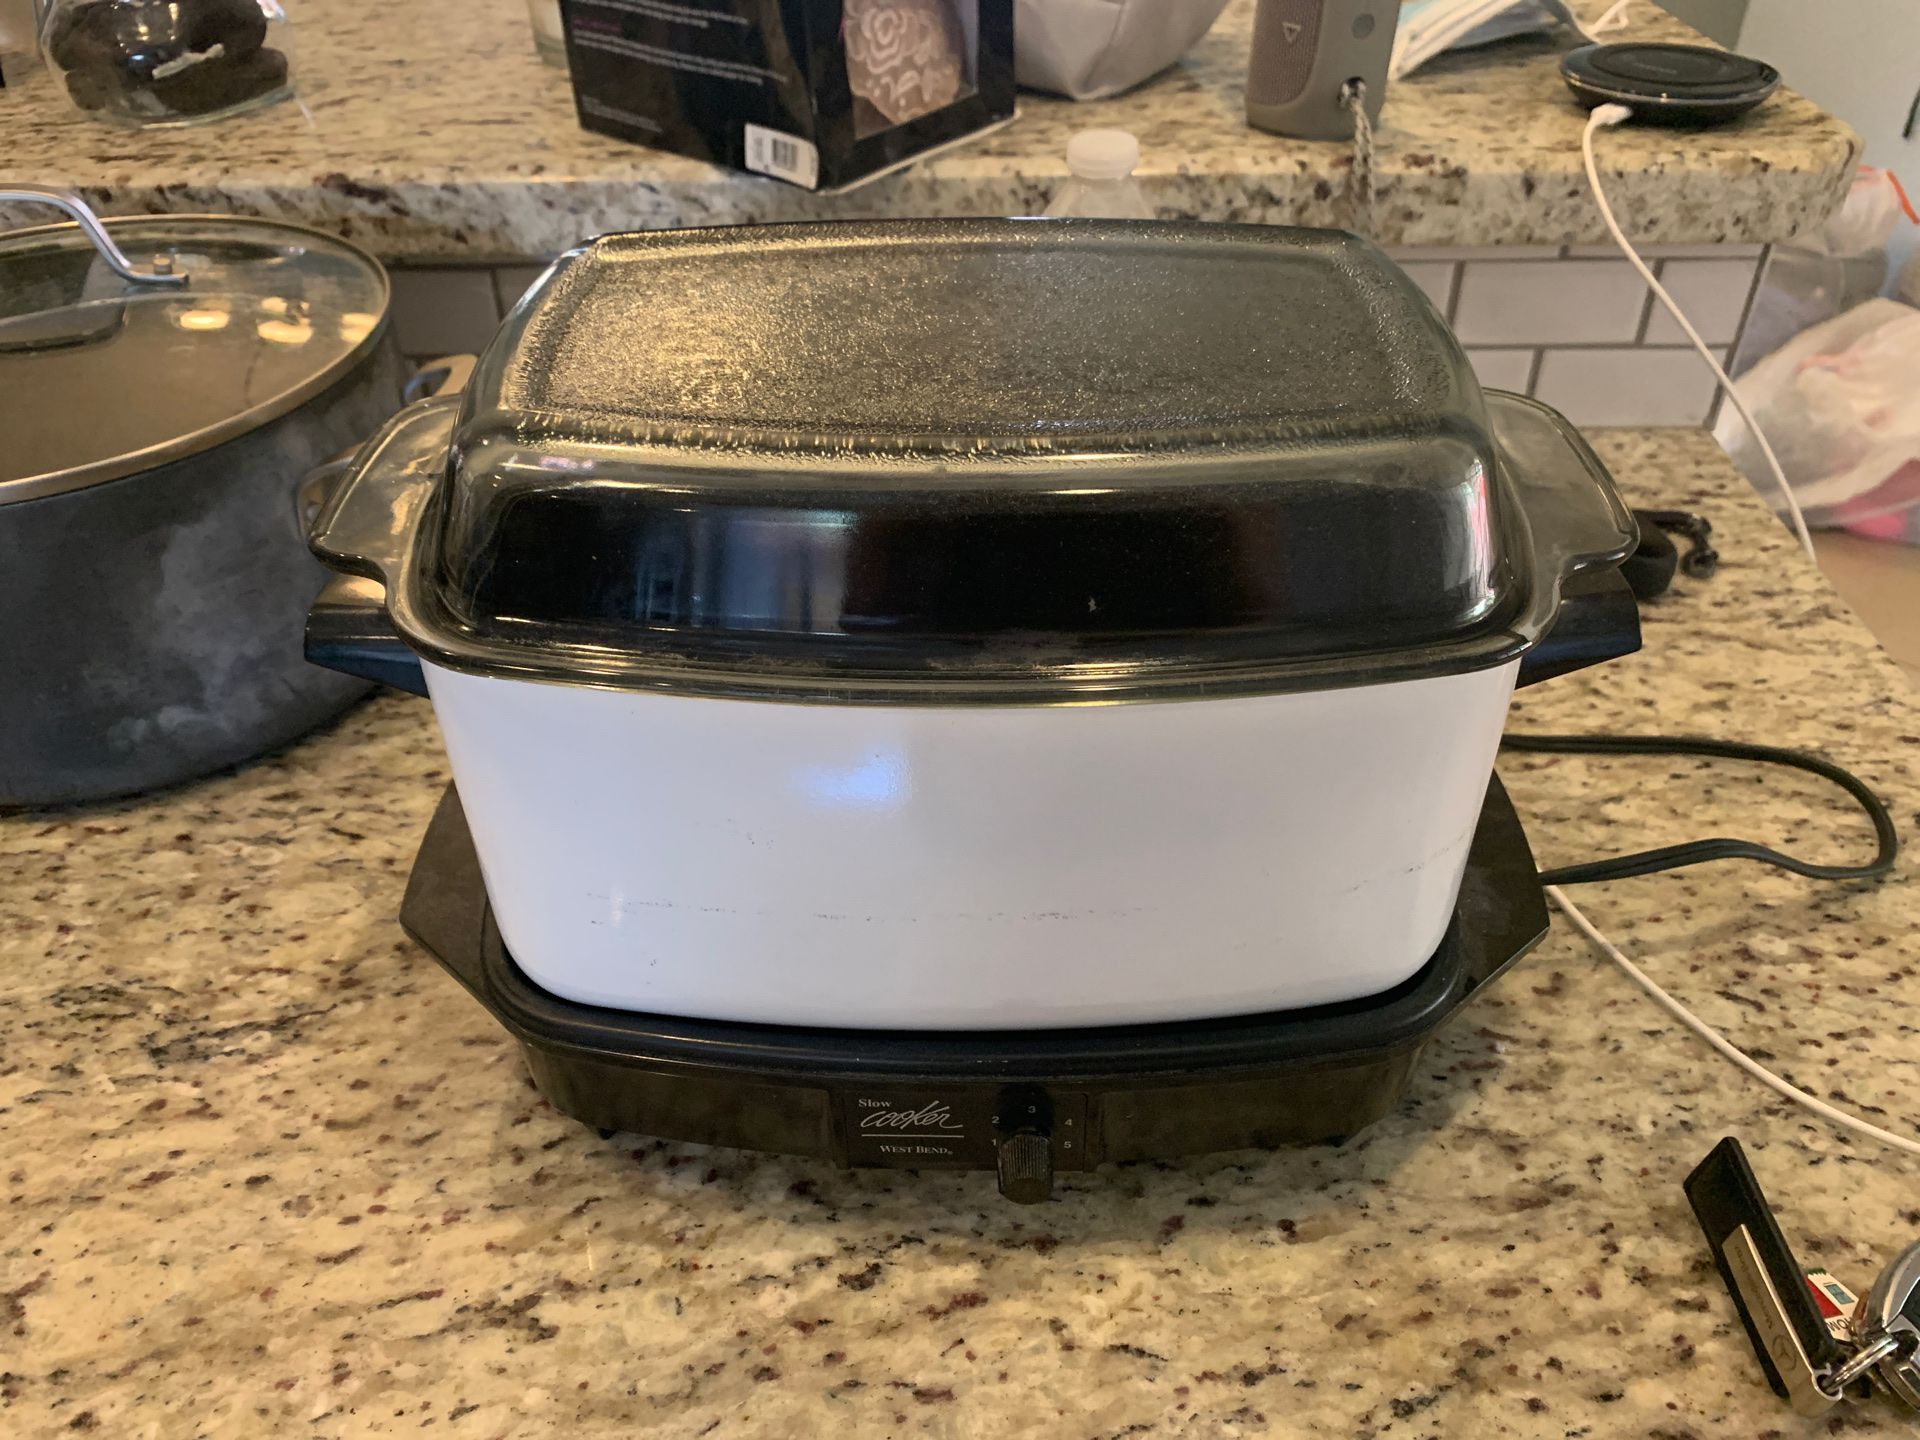 Crockpot Classic Slow Cooker 4.5 Qt 3 Heat Settings Brand New for Sale in  Oakland Park, FL - OfferUp